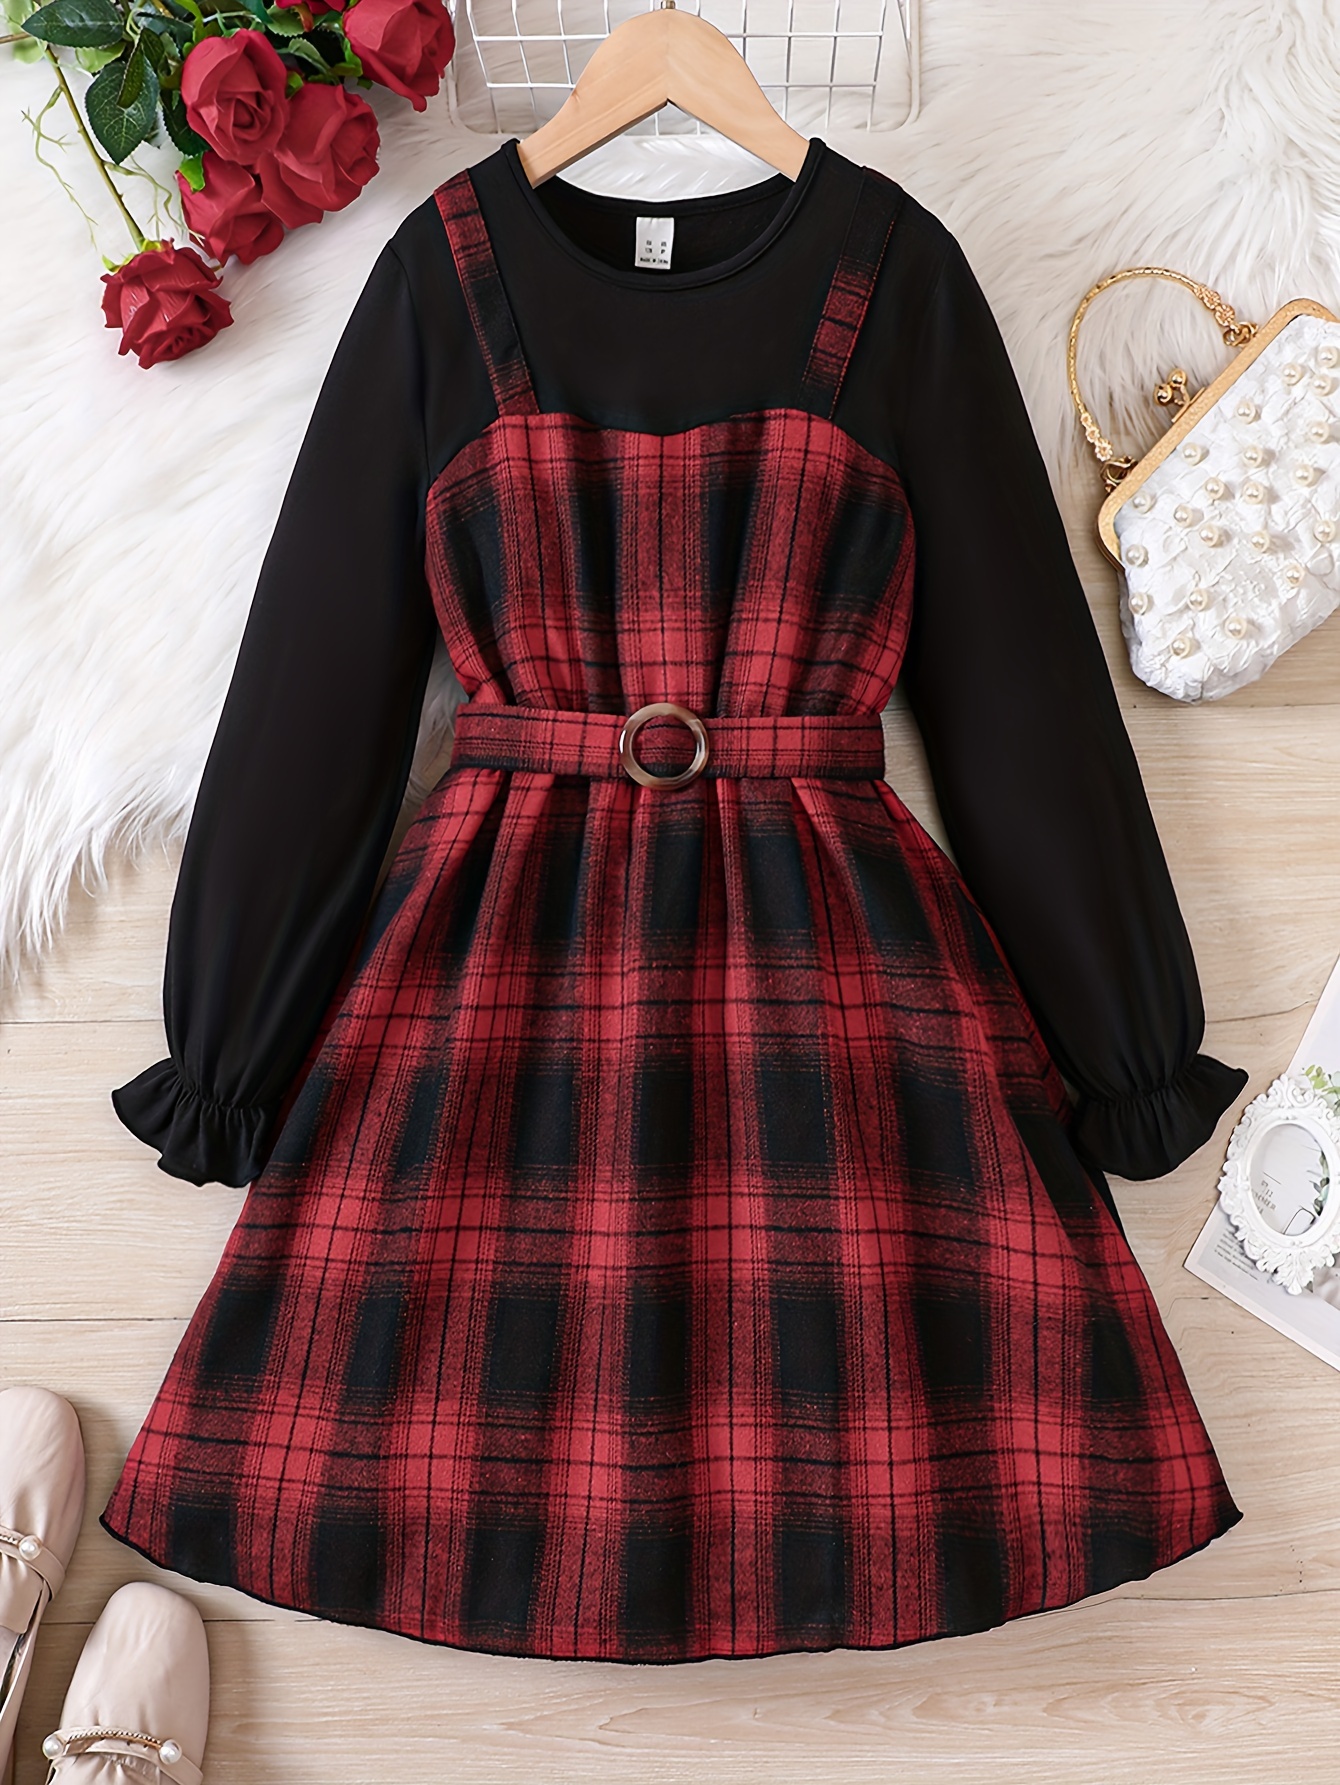 Girl Retro Plaid Suspendar Spliced Long Sleeve Tunic Dress For Classic &  Casual Look, Tween Girls Clothing For Fall/ Spring